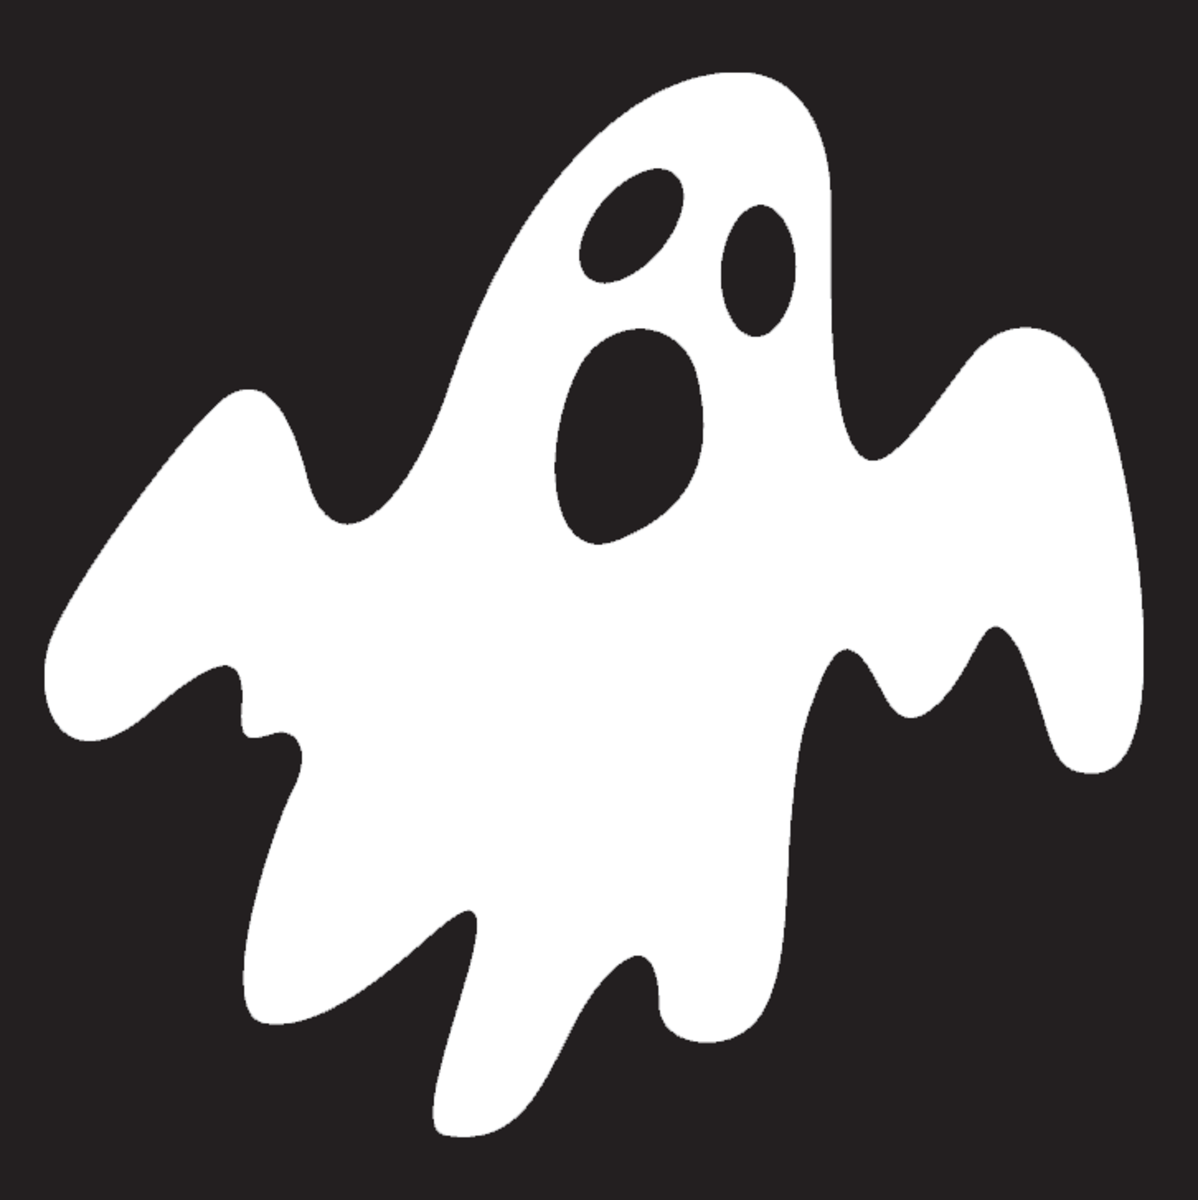 Ghosts--What Type of Haunting Do You Have?